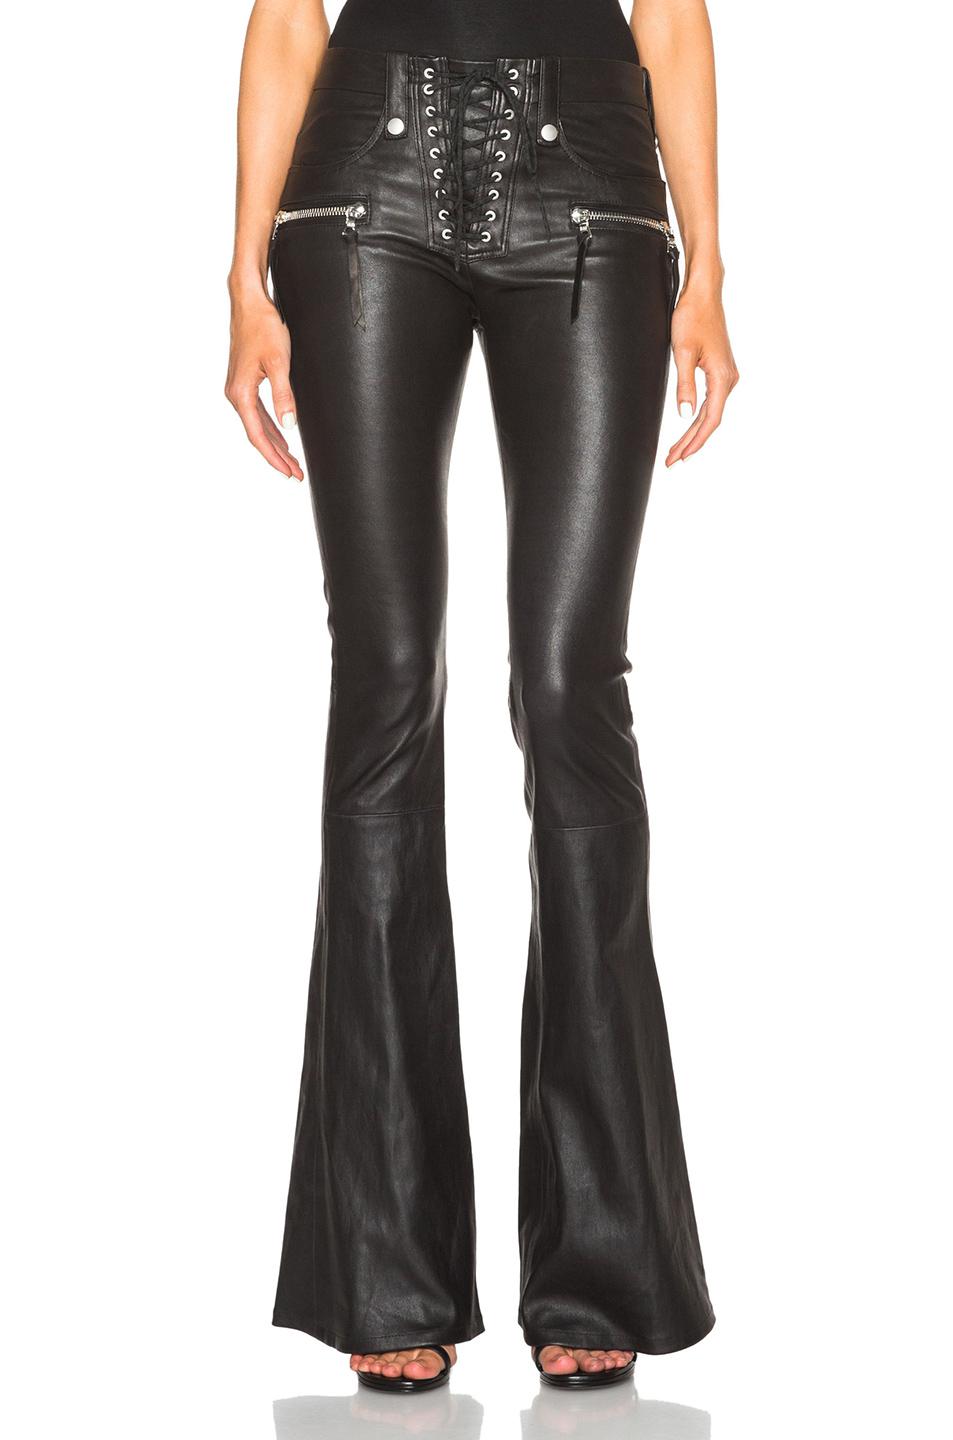 Unravel Project Lace Front Flare Leather Pants in Black - Lyst